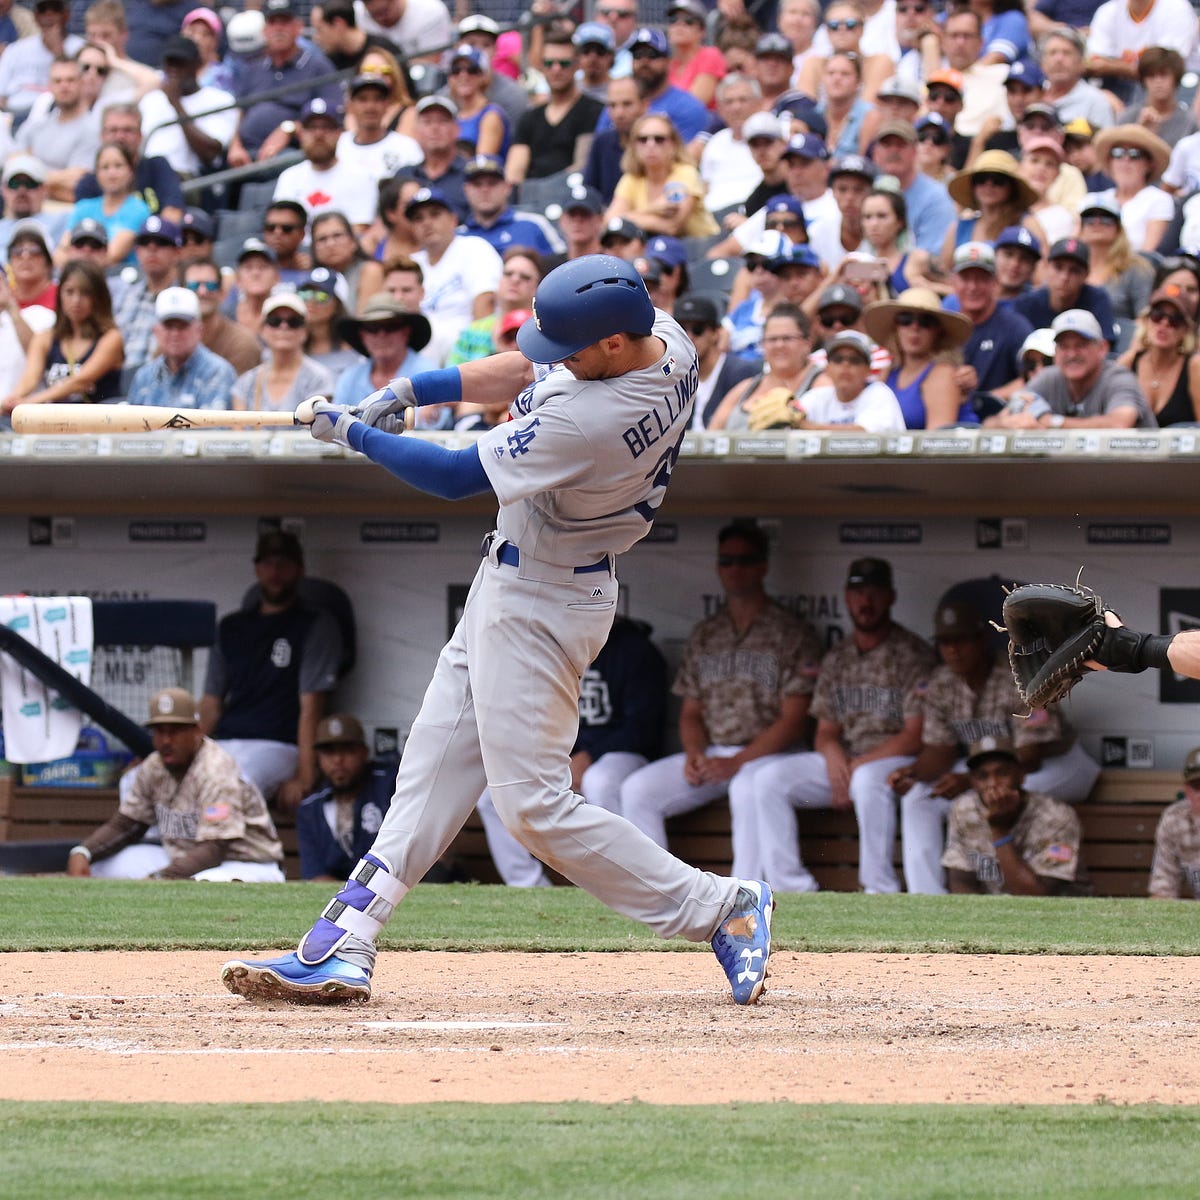 Cody Bellinger homers, collects three hits in win vs. Cardinals